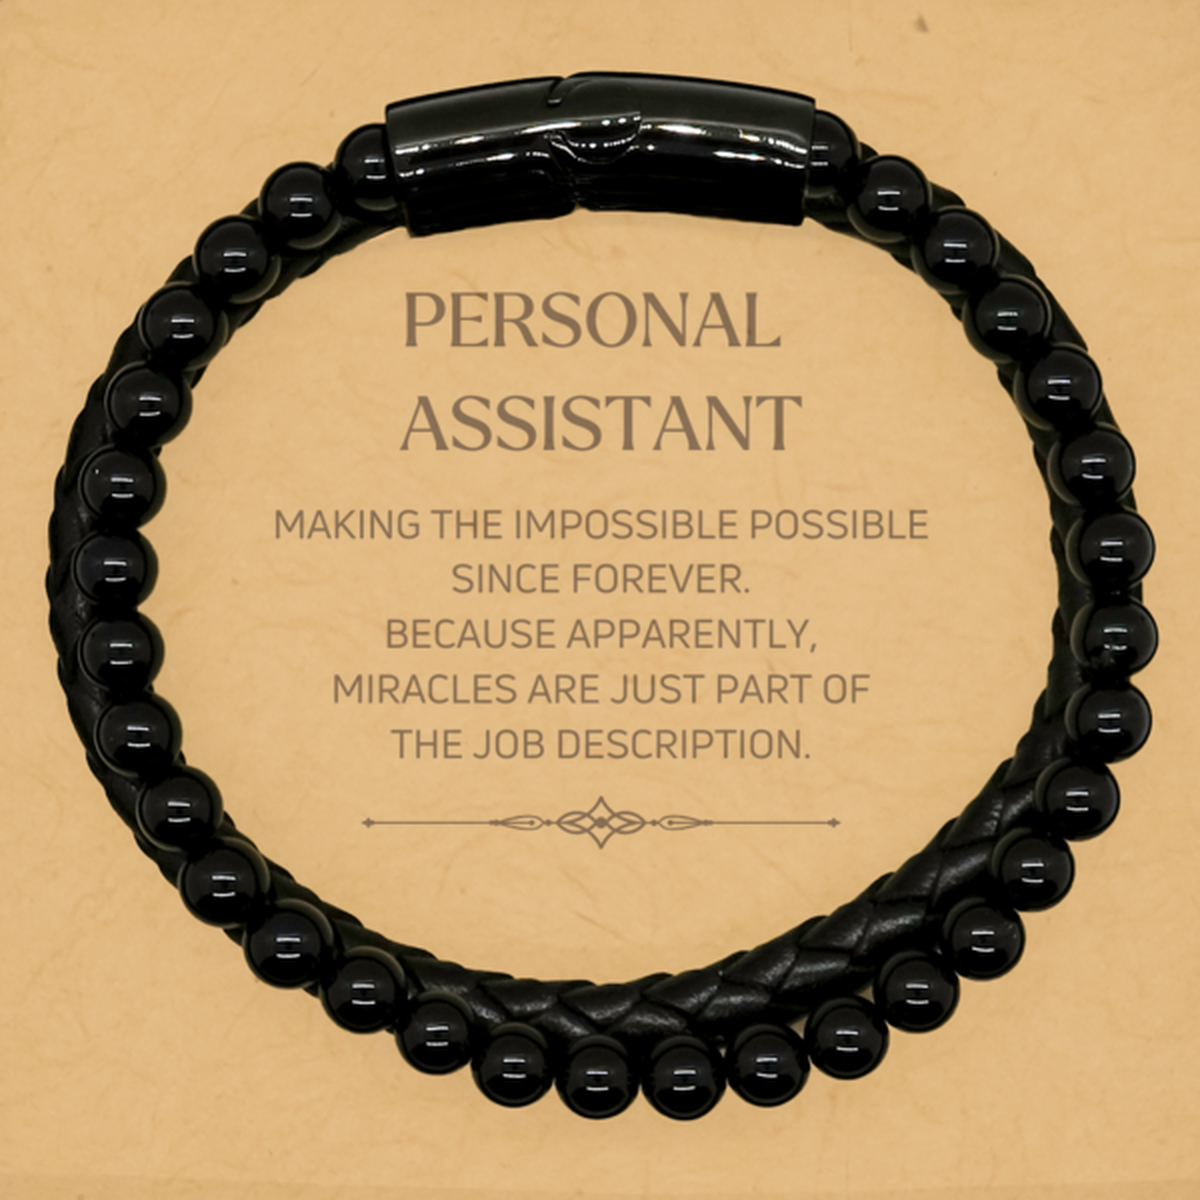 Funny Personal Assistant Gifts, Miracles are just part of the job description, Inspirational Birthday Stone Leather Bracelets For Personal Assistant, Men, Women, Coworkers, Friends, Boss